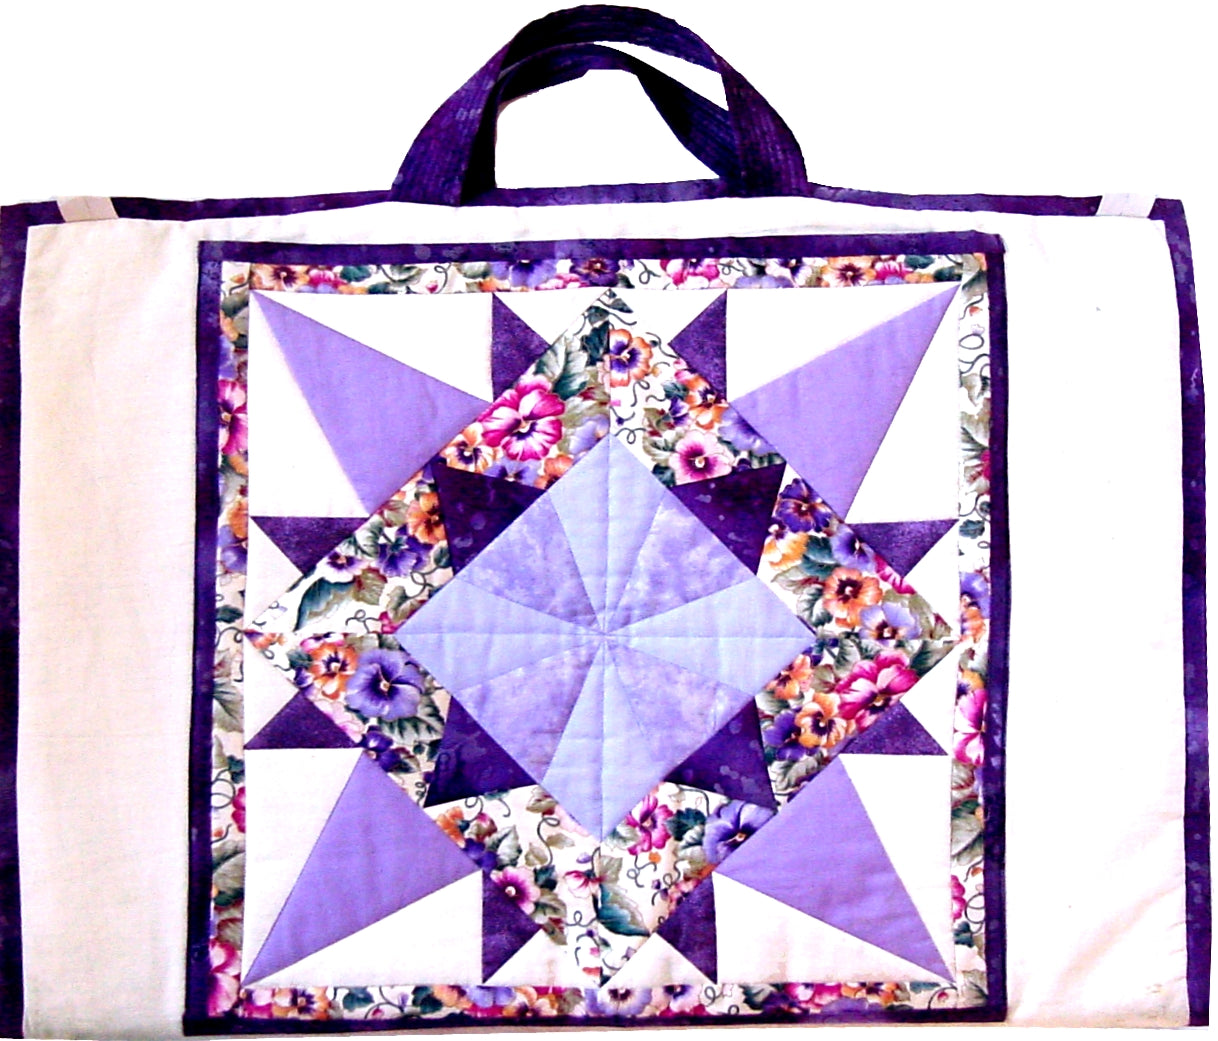 quilter's tote pattern